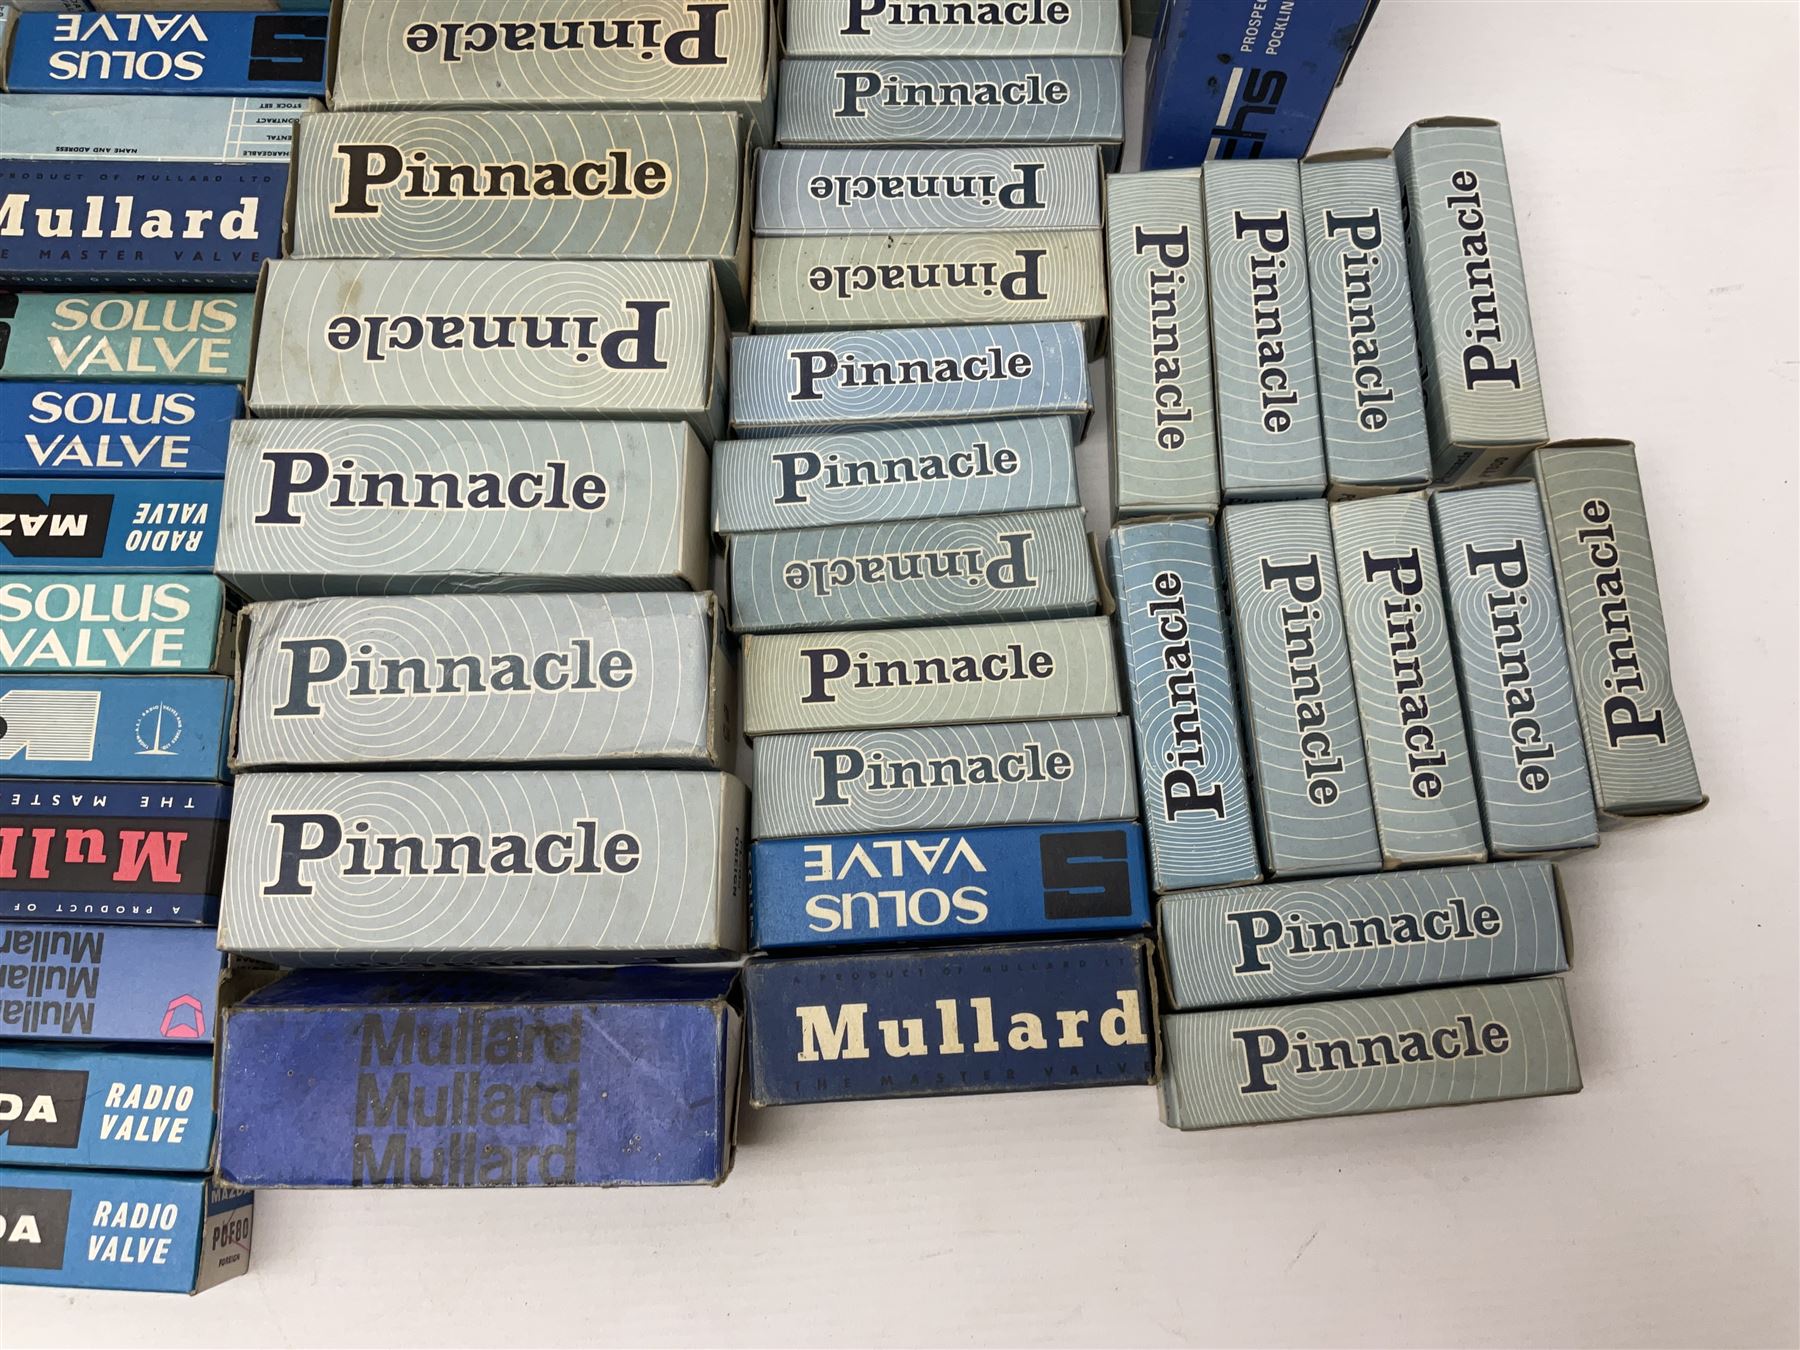 Collection of empty boxes for Pinnacle - Image 8 of 8